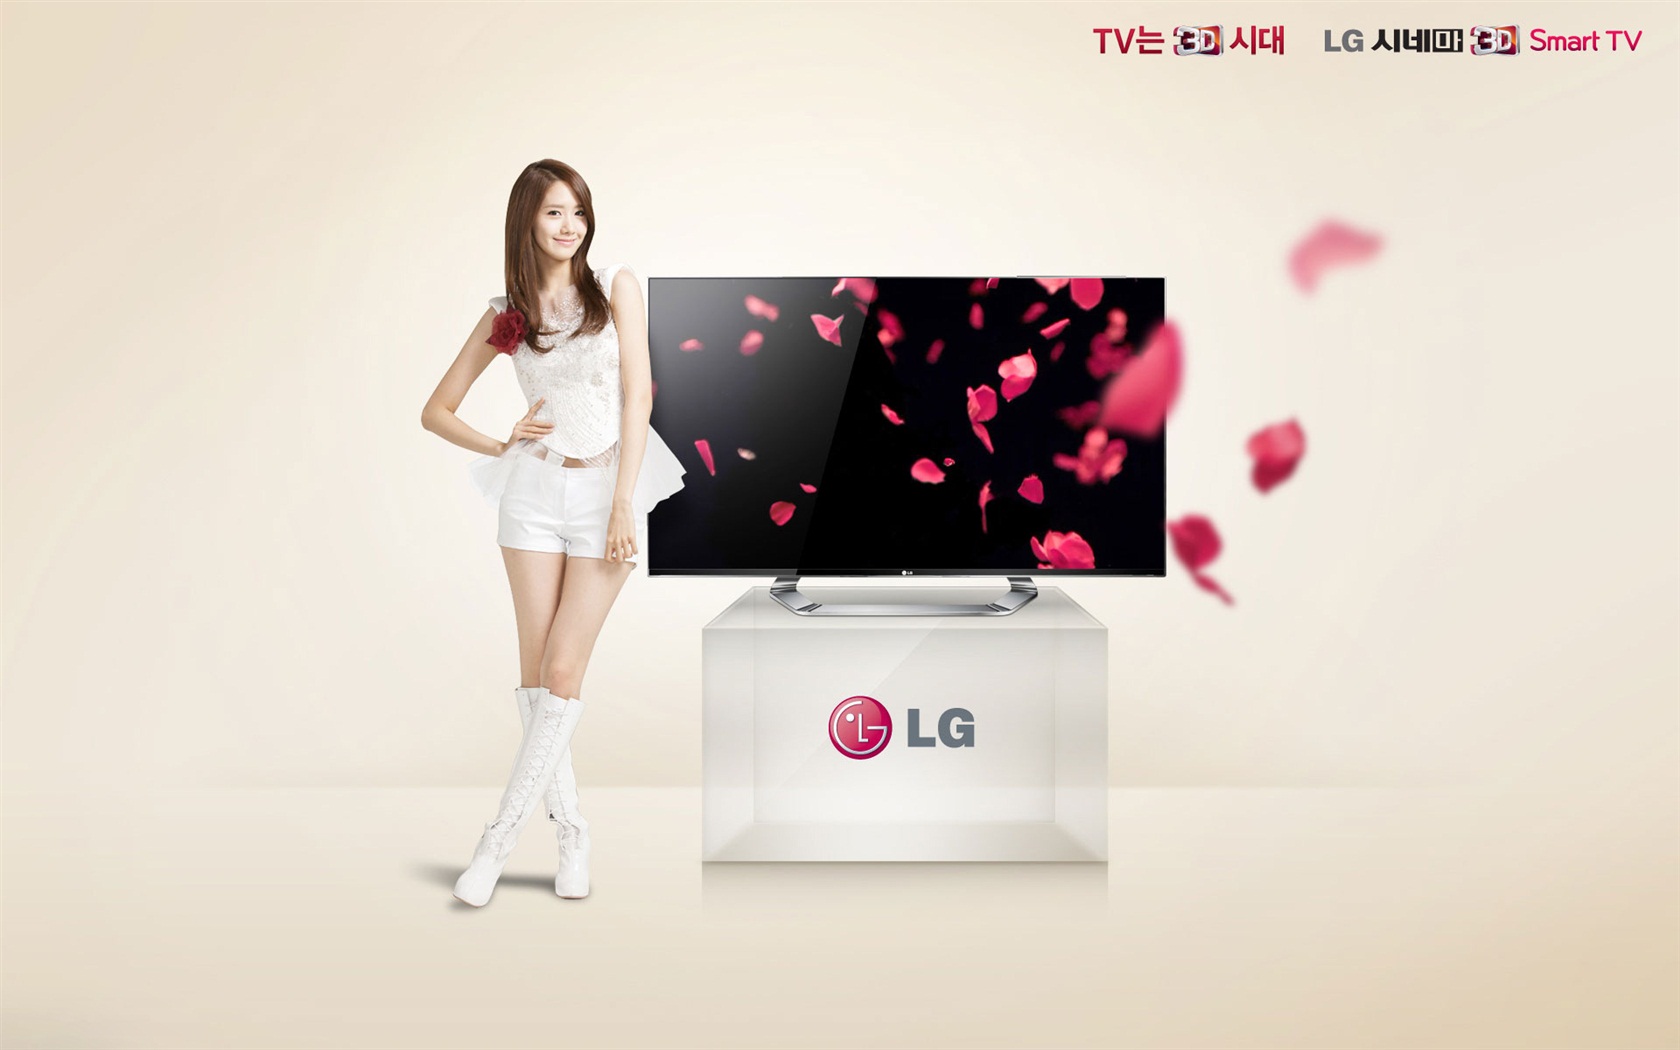 Girls Generation ACE and LG endorsements ads HD wallpapers #20 - 1680x1050